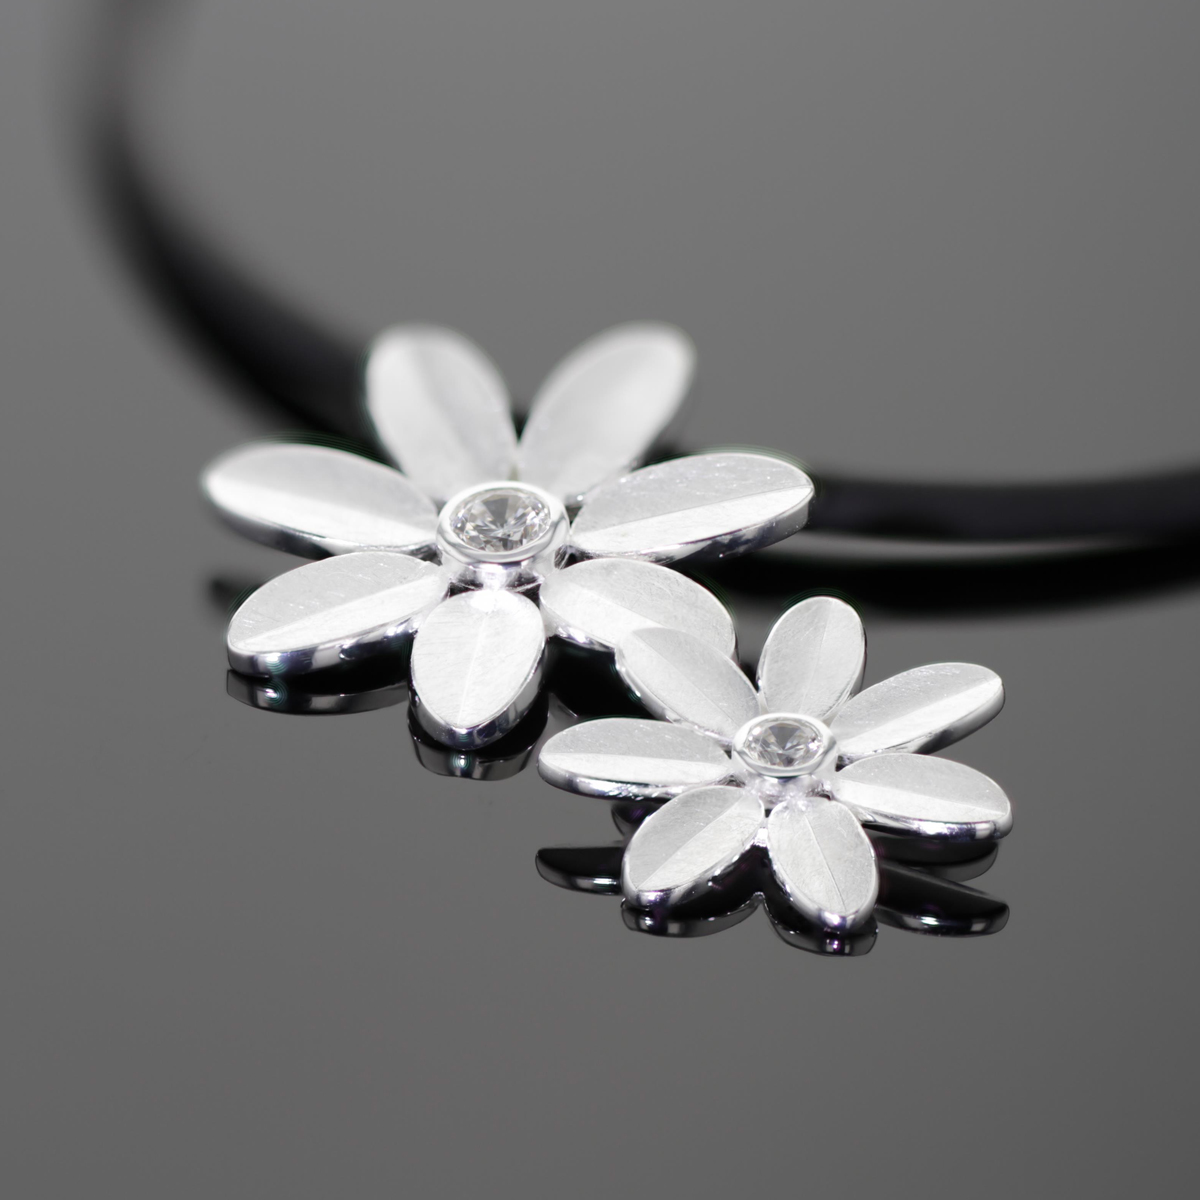 Flower pendant in brushed silver with a zirconia at its center